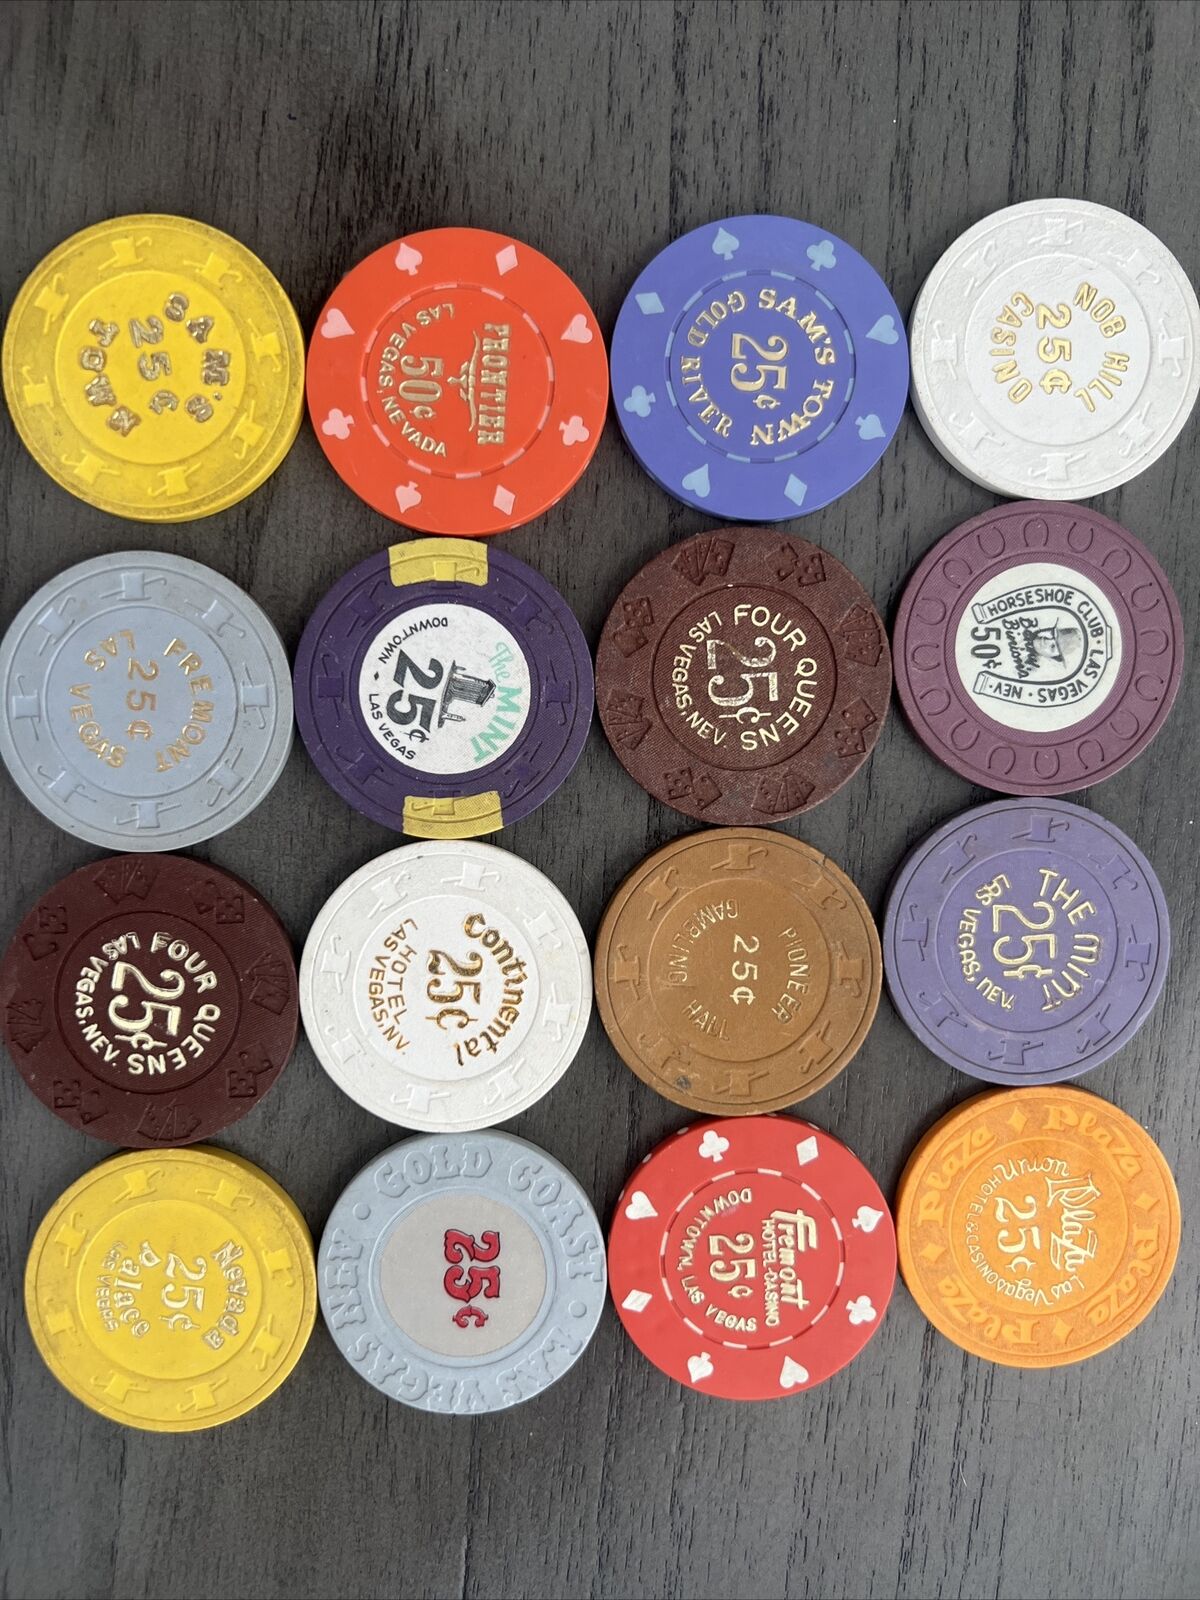 Lot of Las Vegas Casino Chips. Some Vintage Ones In There.